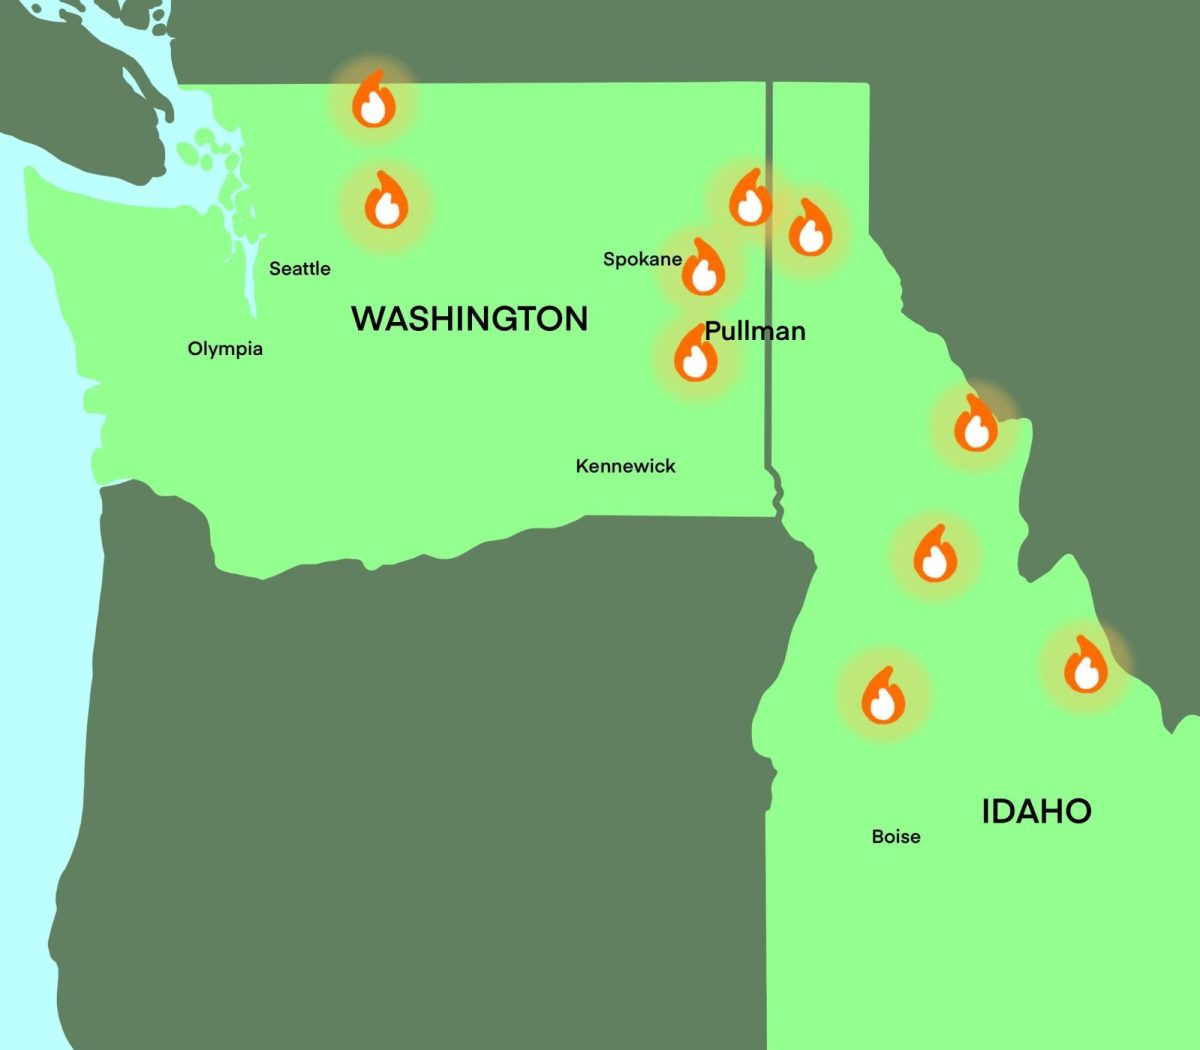 Washington and Idaho will face at least another month of wildfire season.